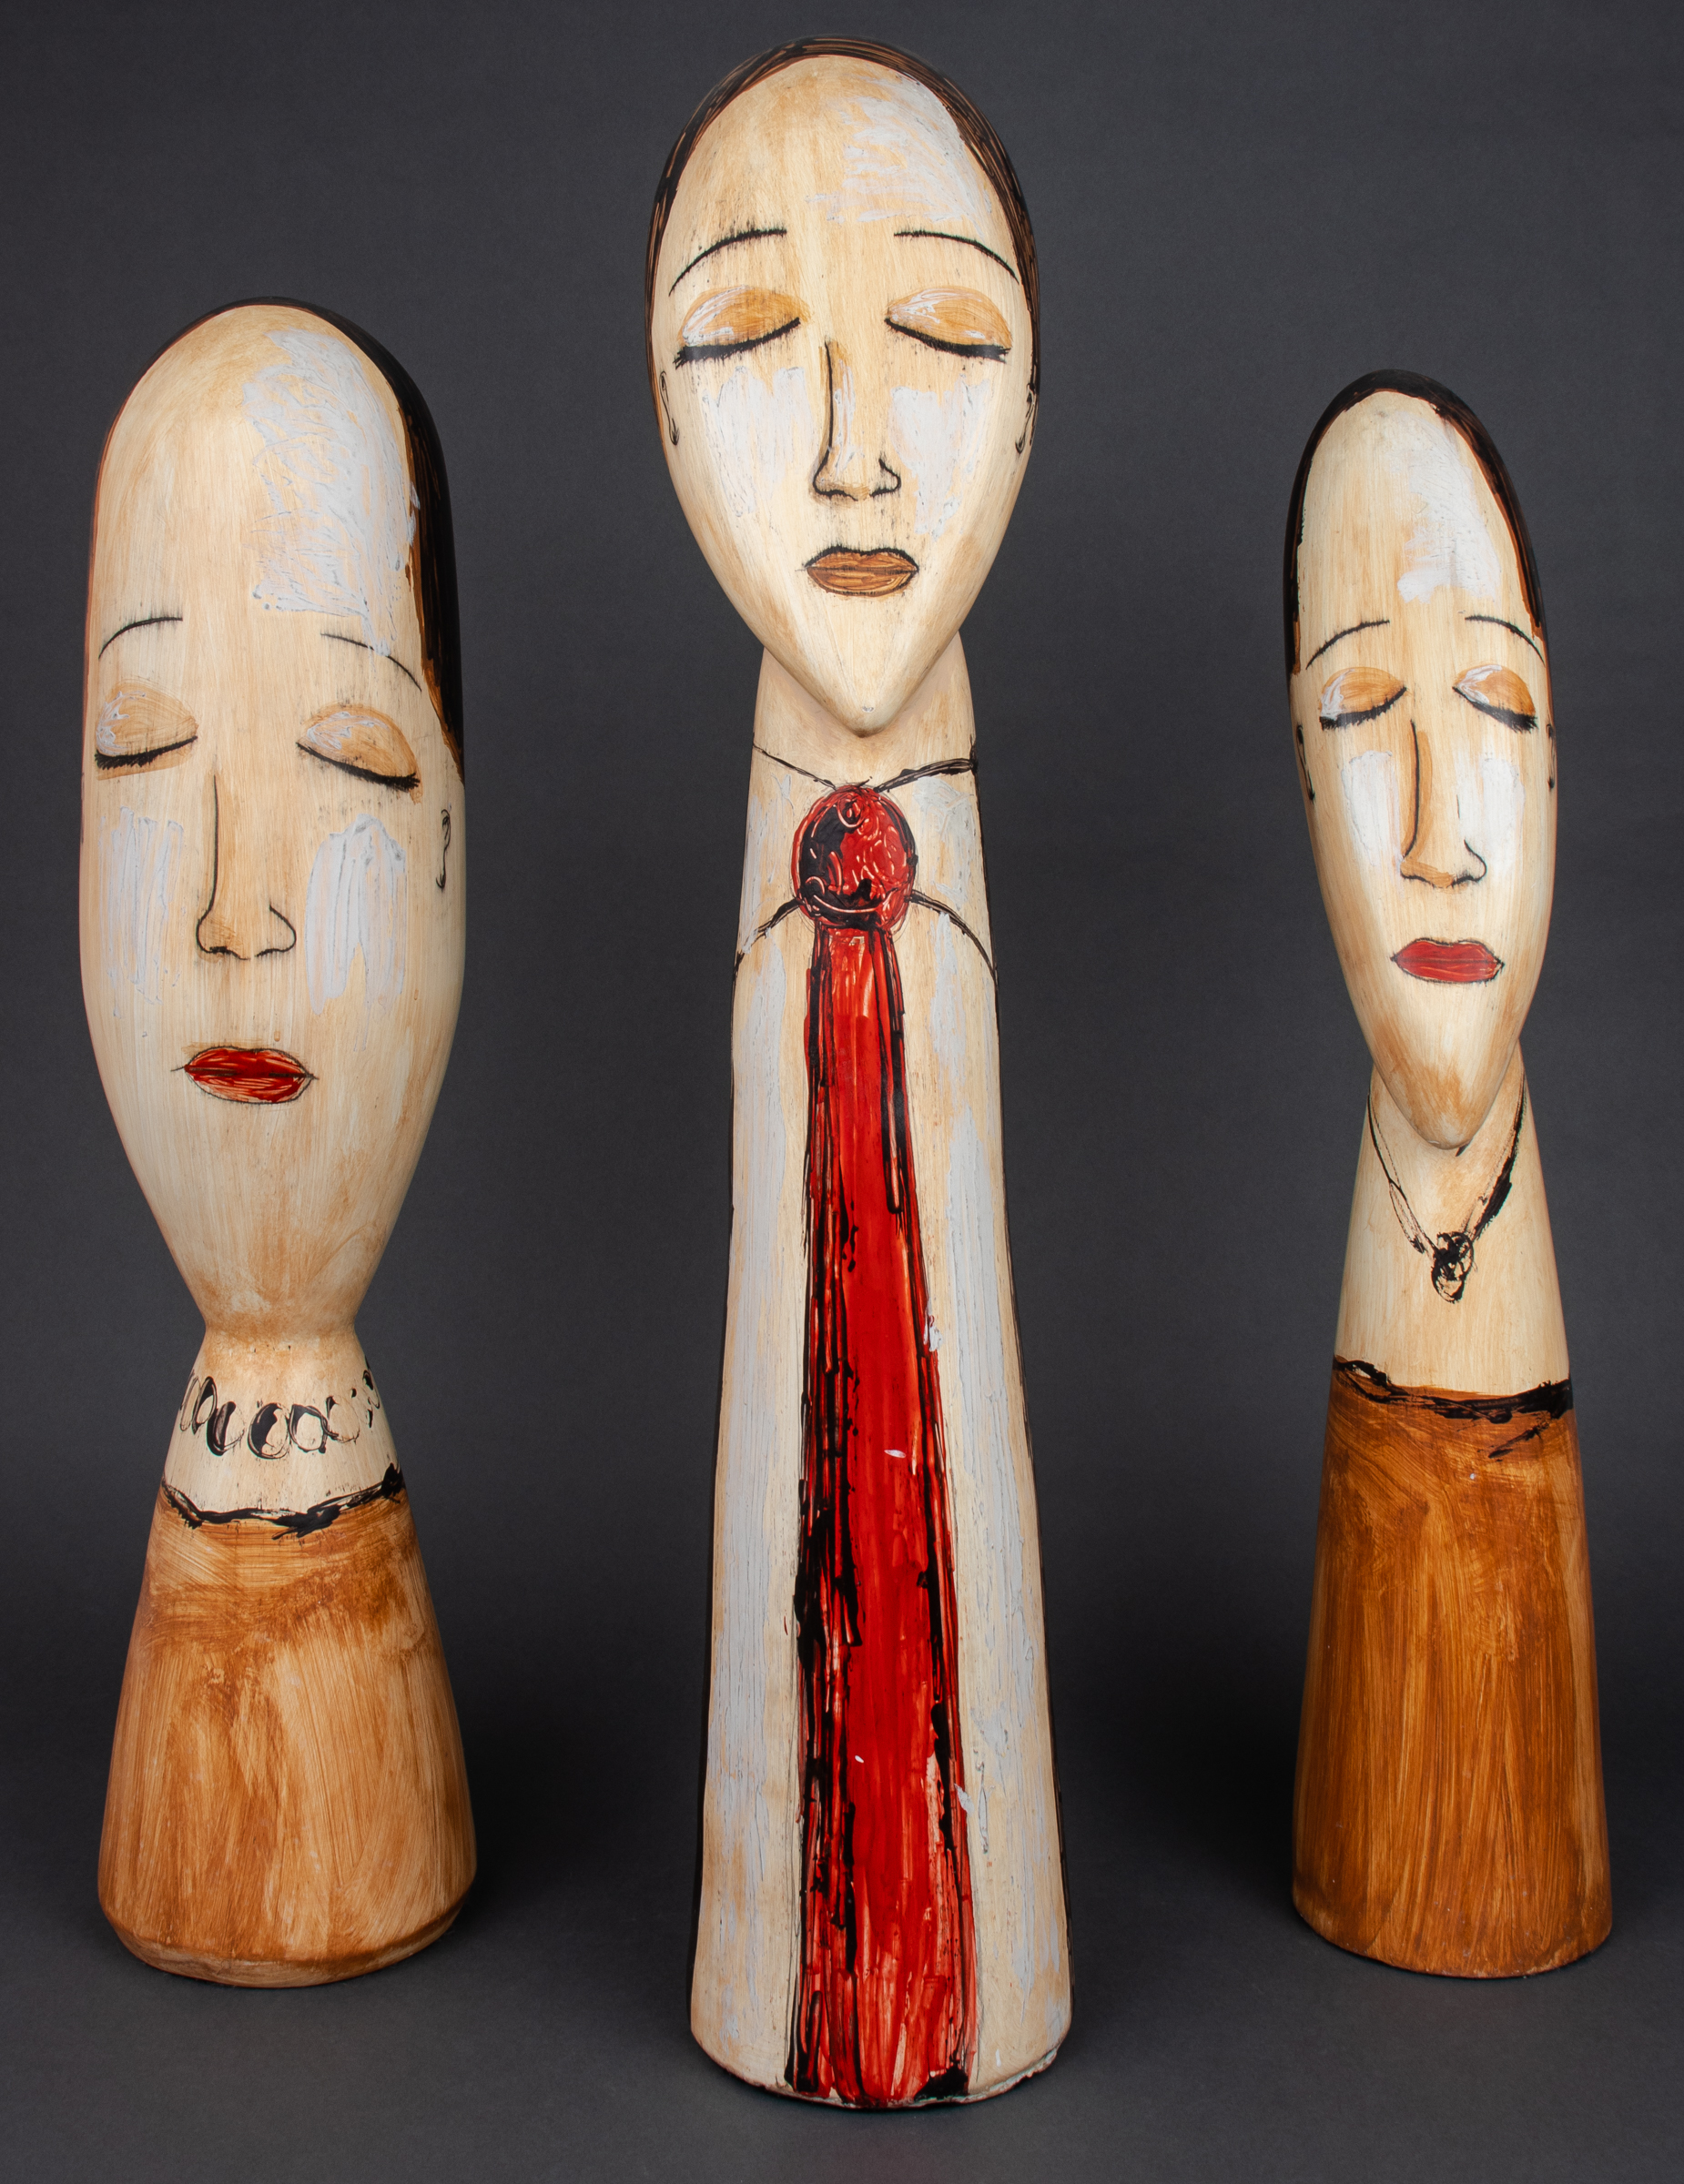 OUTSIDER / FOLK ART MEXICAN BUSTS